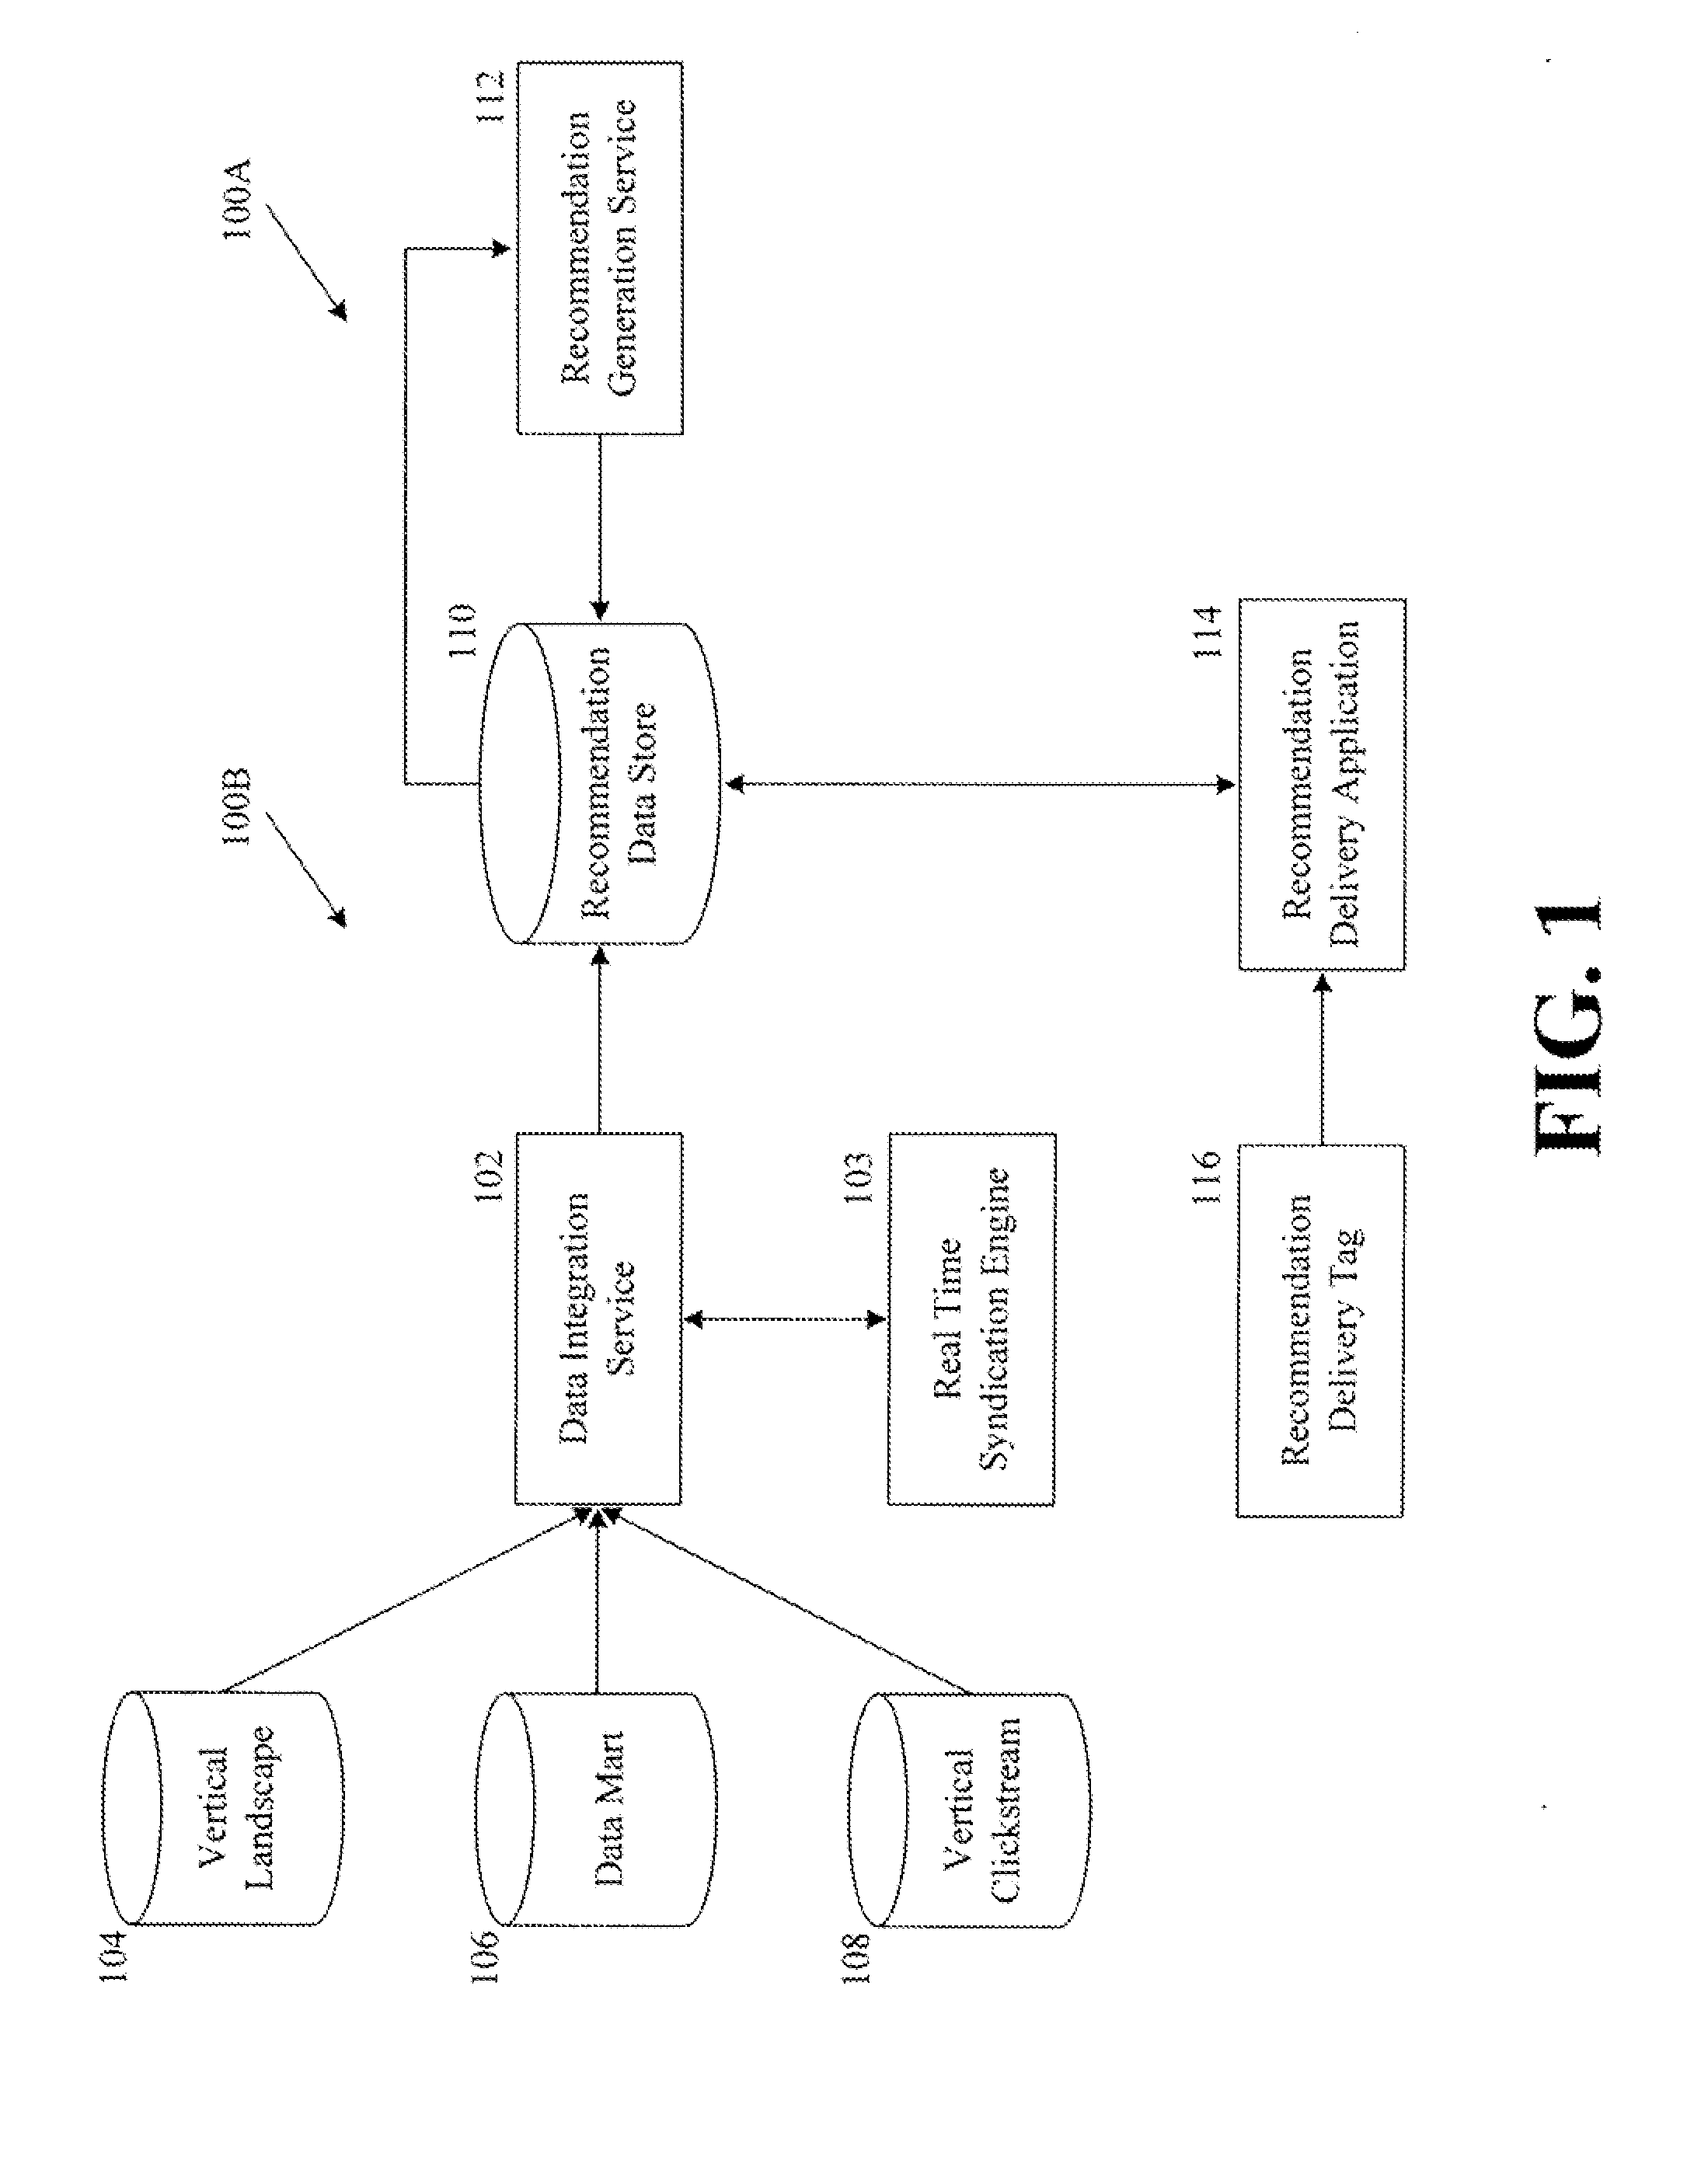 Systems and Methods for Providing Targeted Content